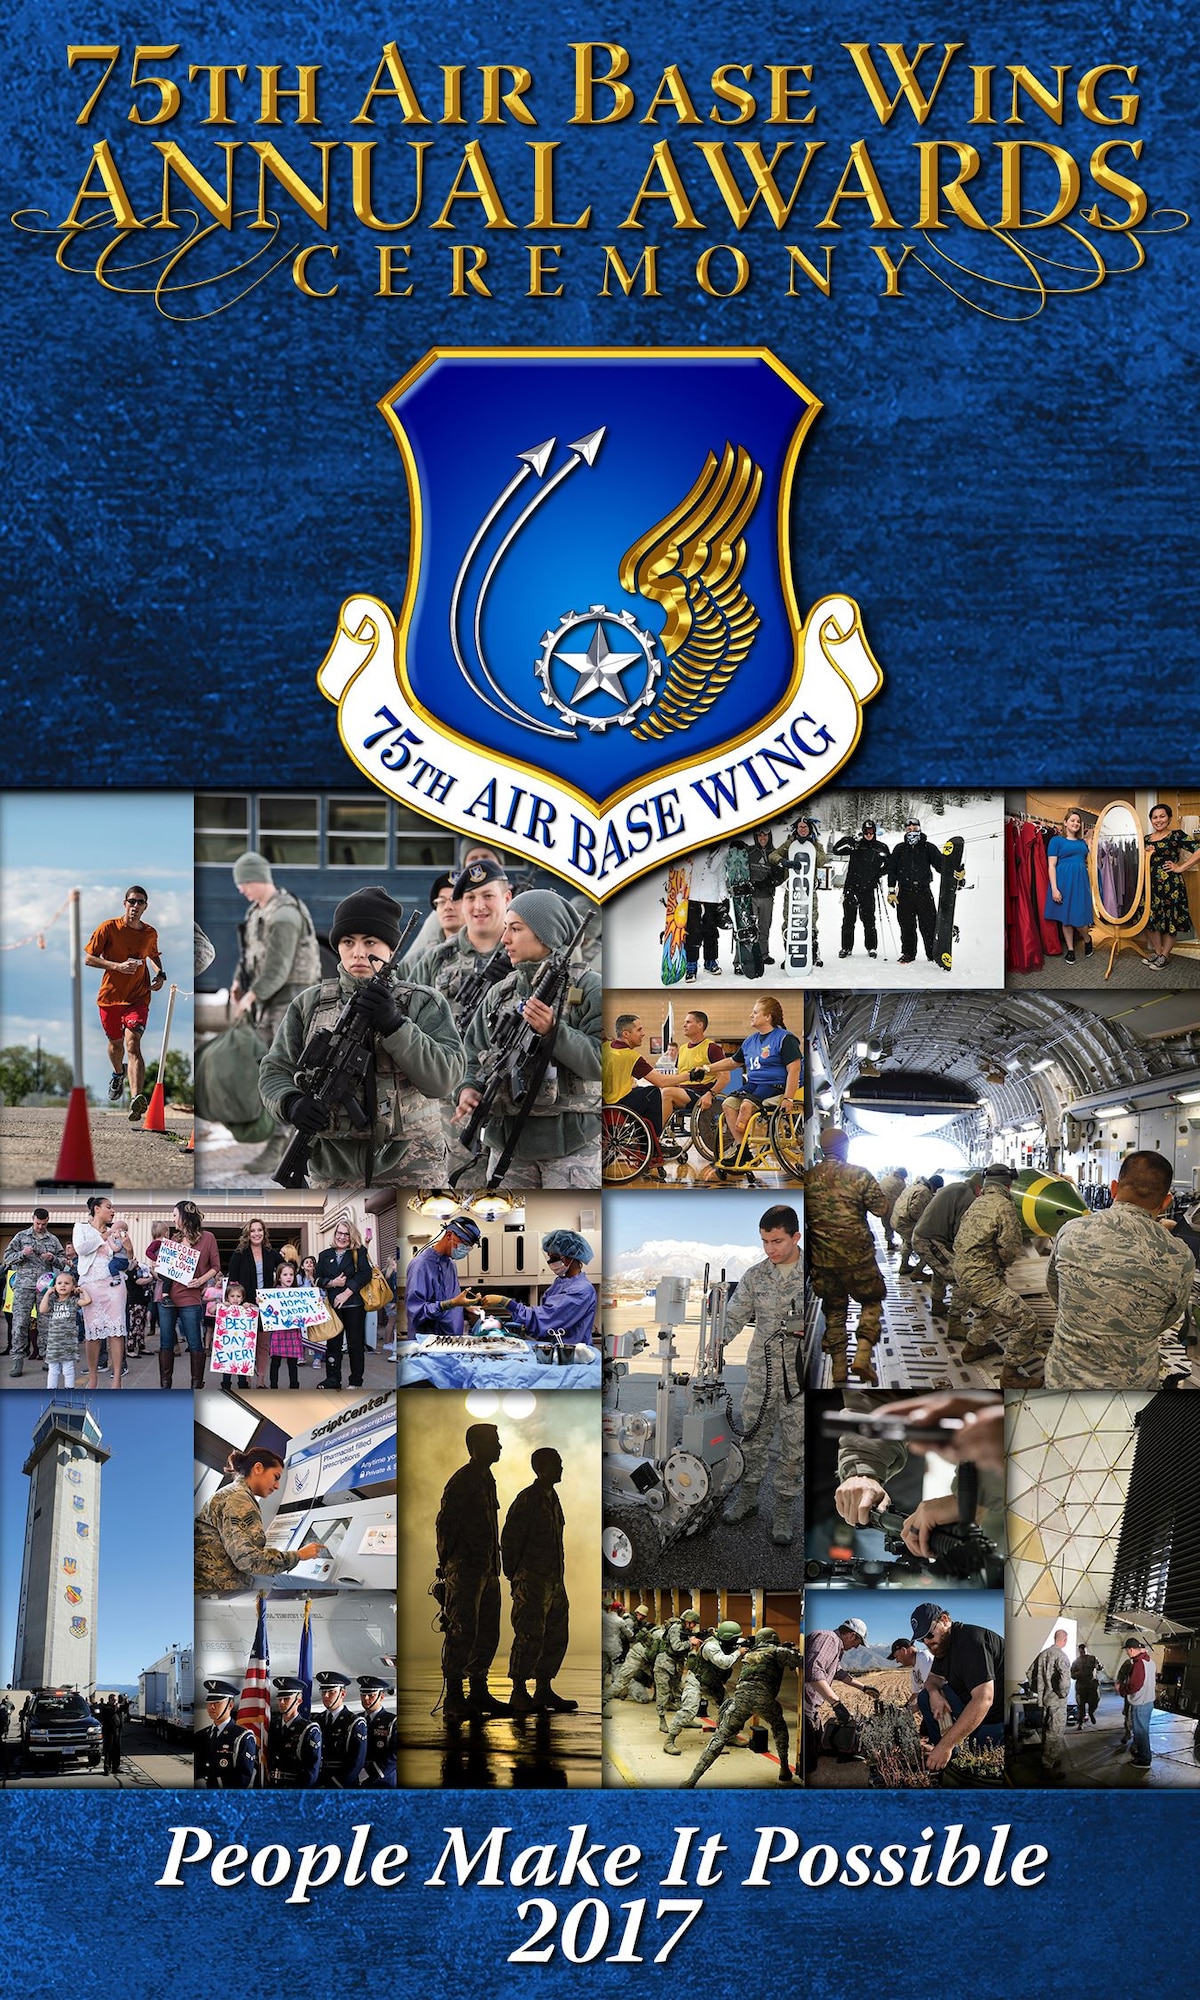 2017 75th Air Base Wing Annual Awards Ceremony graphic (U.S. Air Force graphic by Kent Bingham)